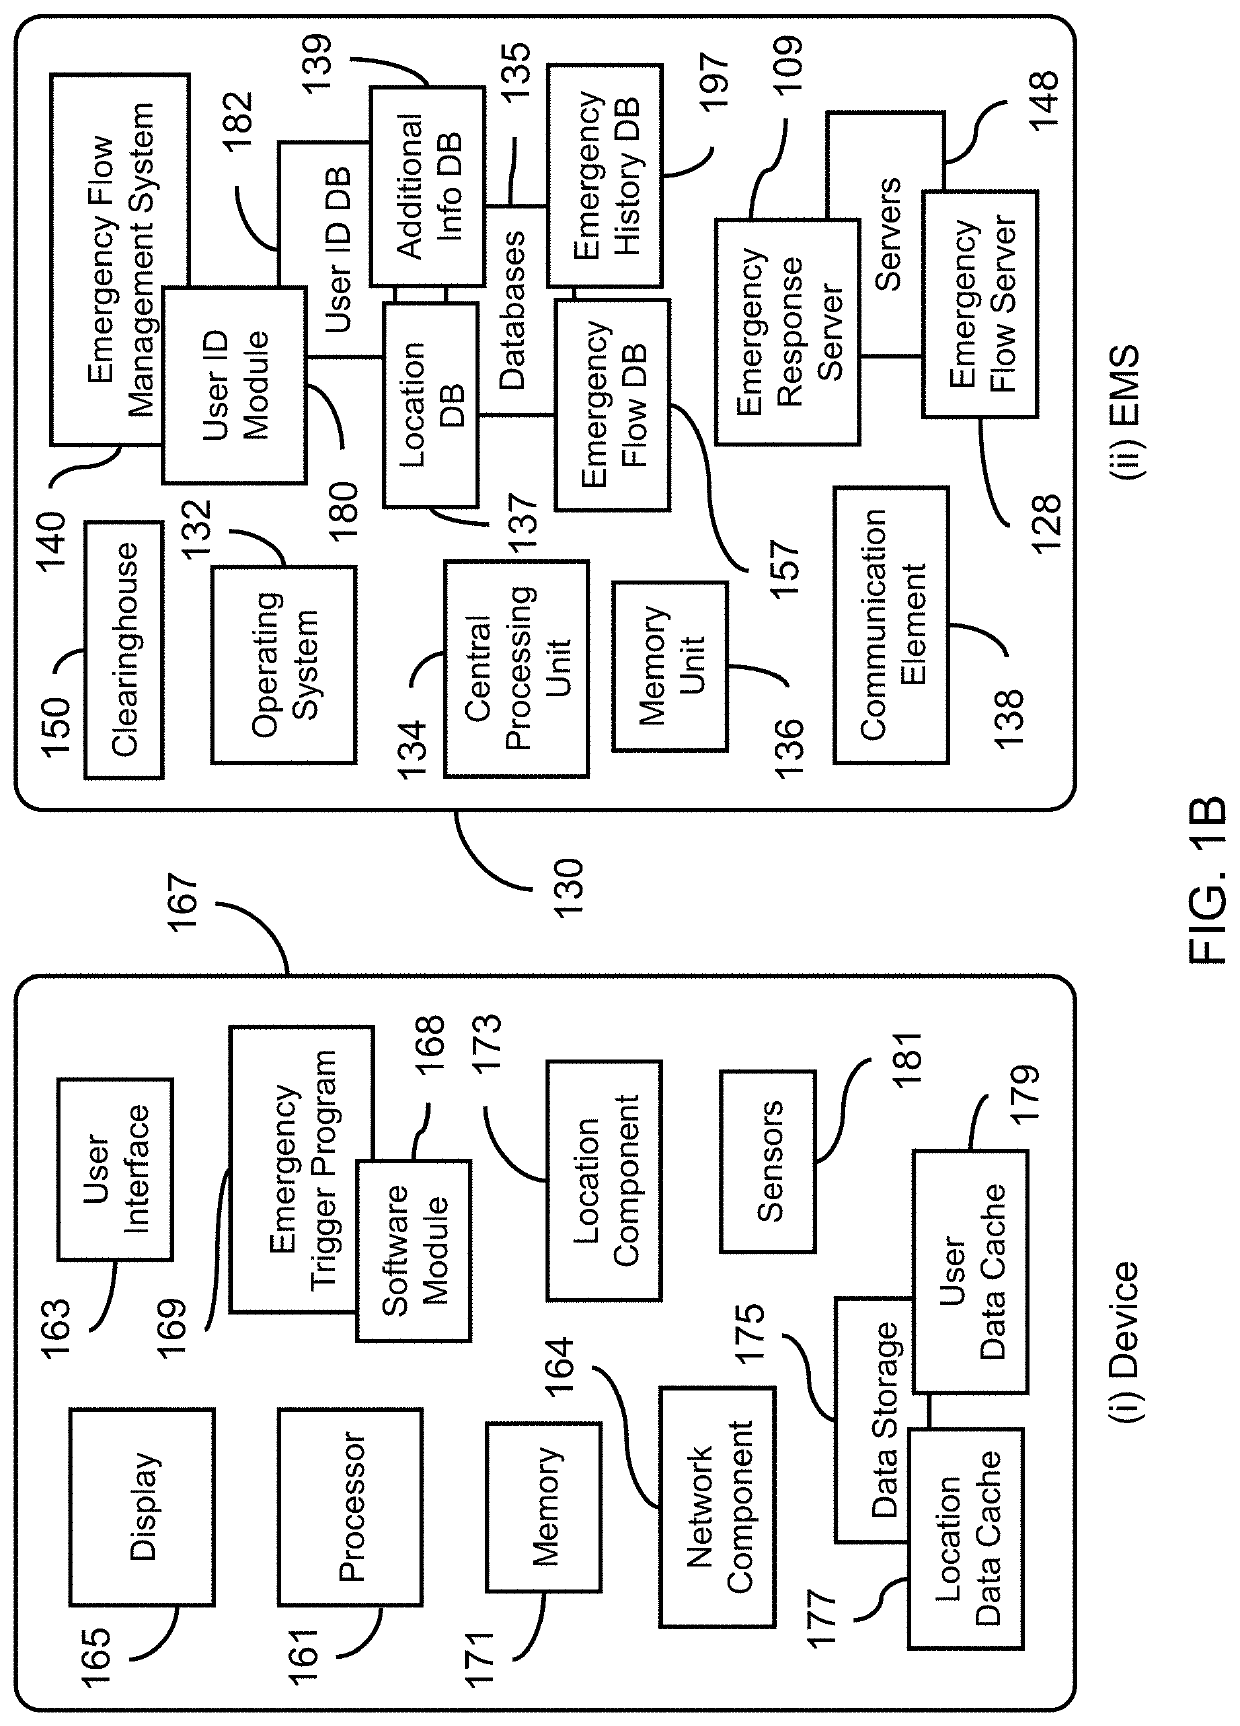 Emergency communication flow management and notification system